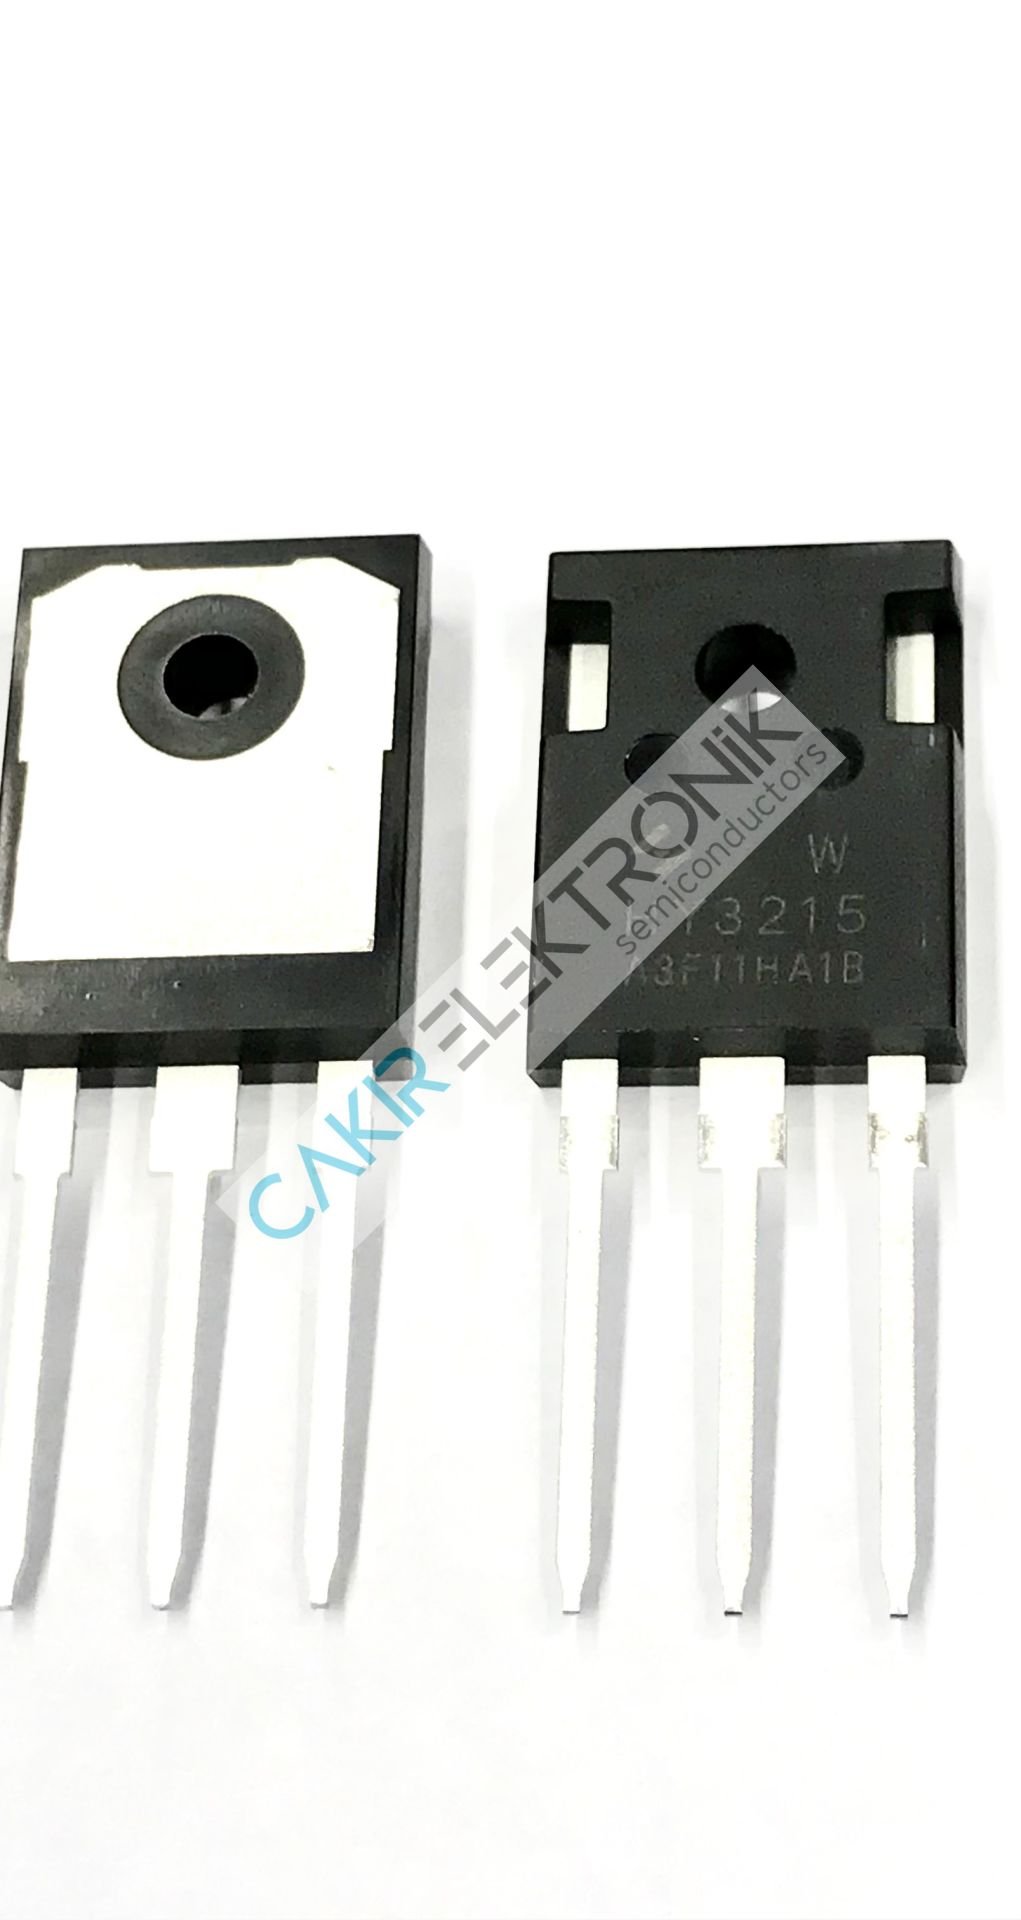 HY3215W - HY3215 - TO-247 - 130A 150V N-CHANNEL MOSFET